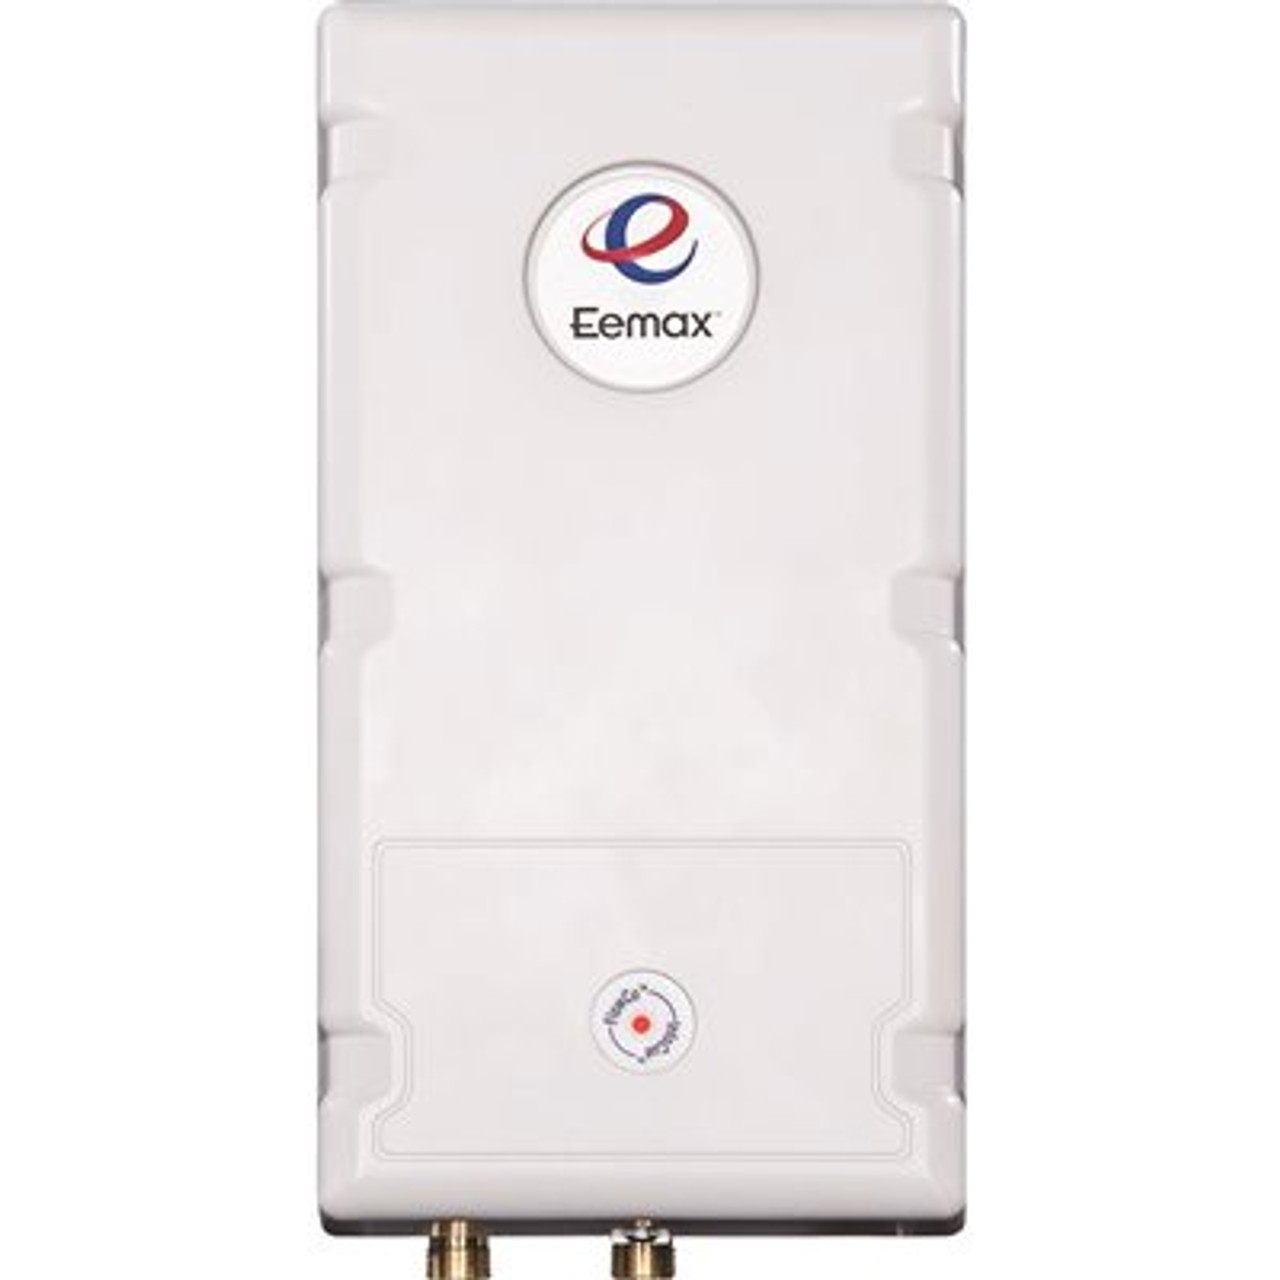 Eemax FlowCo 4.1 kW, 277 Volt Commercial Electric Tankless Water Heater